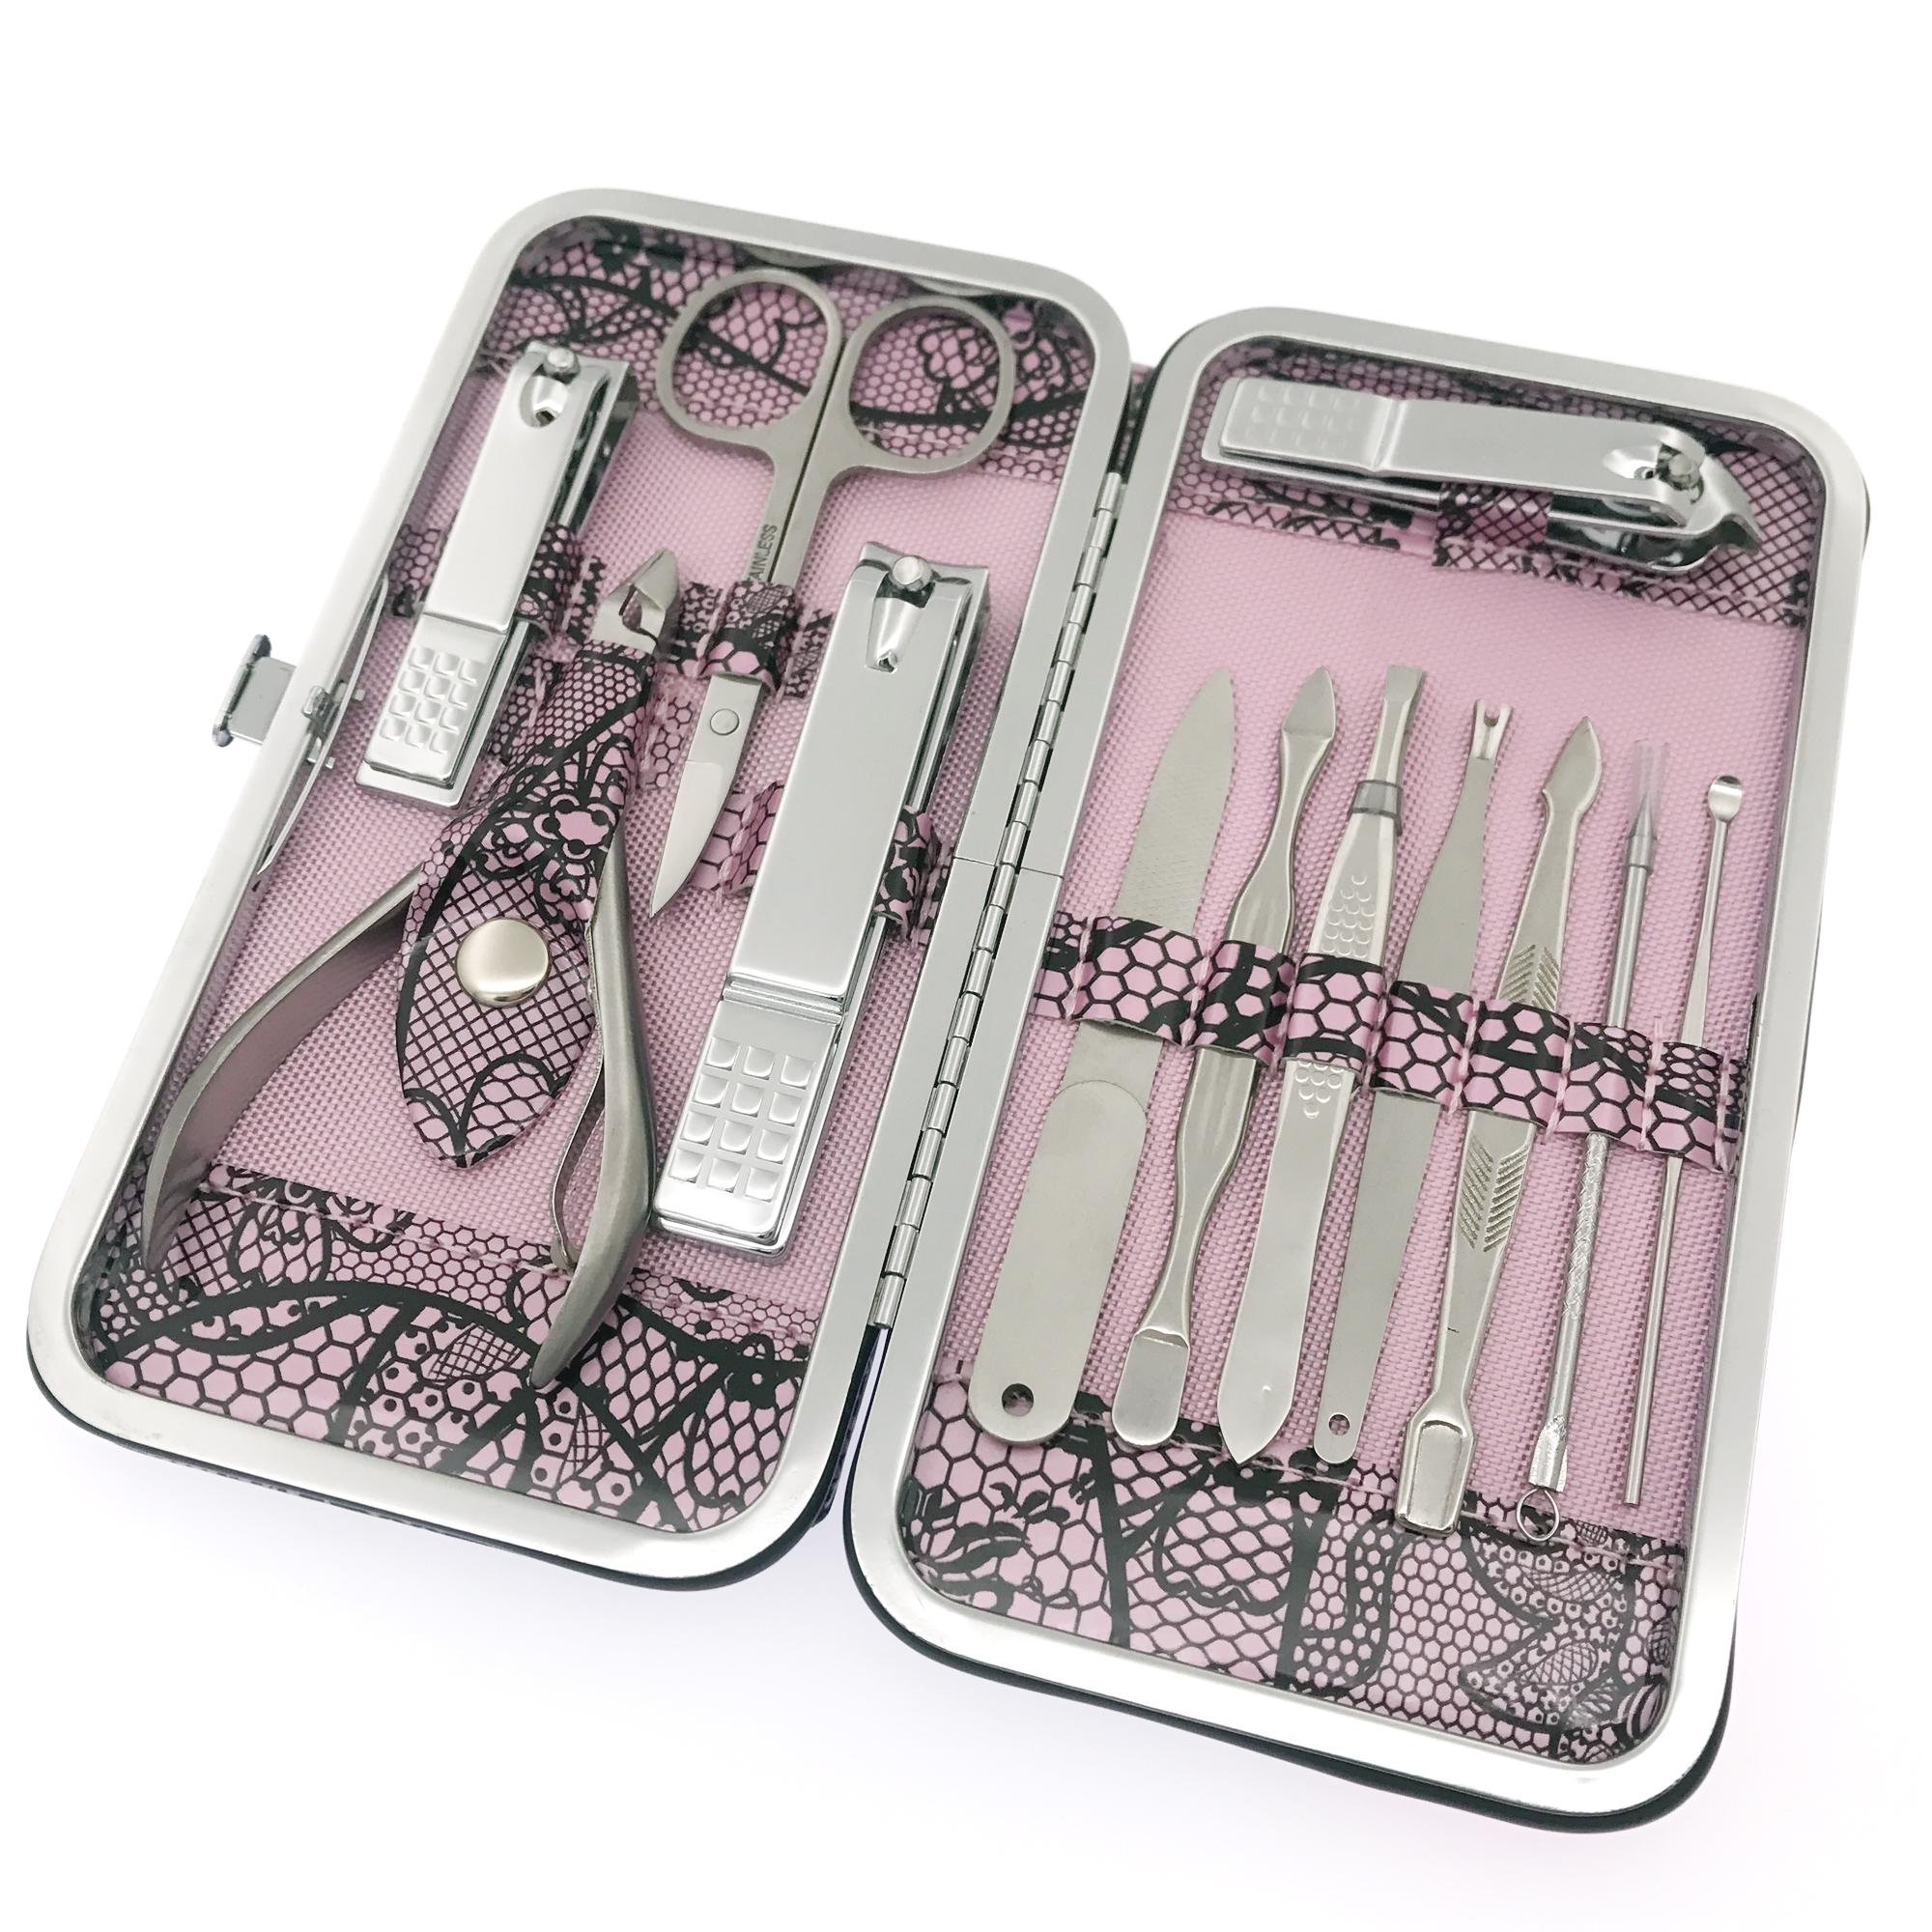 manicure pedicure set nail clippers stainless steel manicure kit